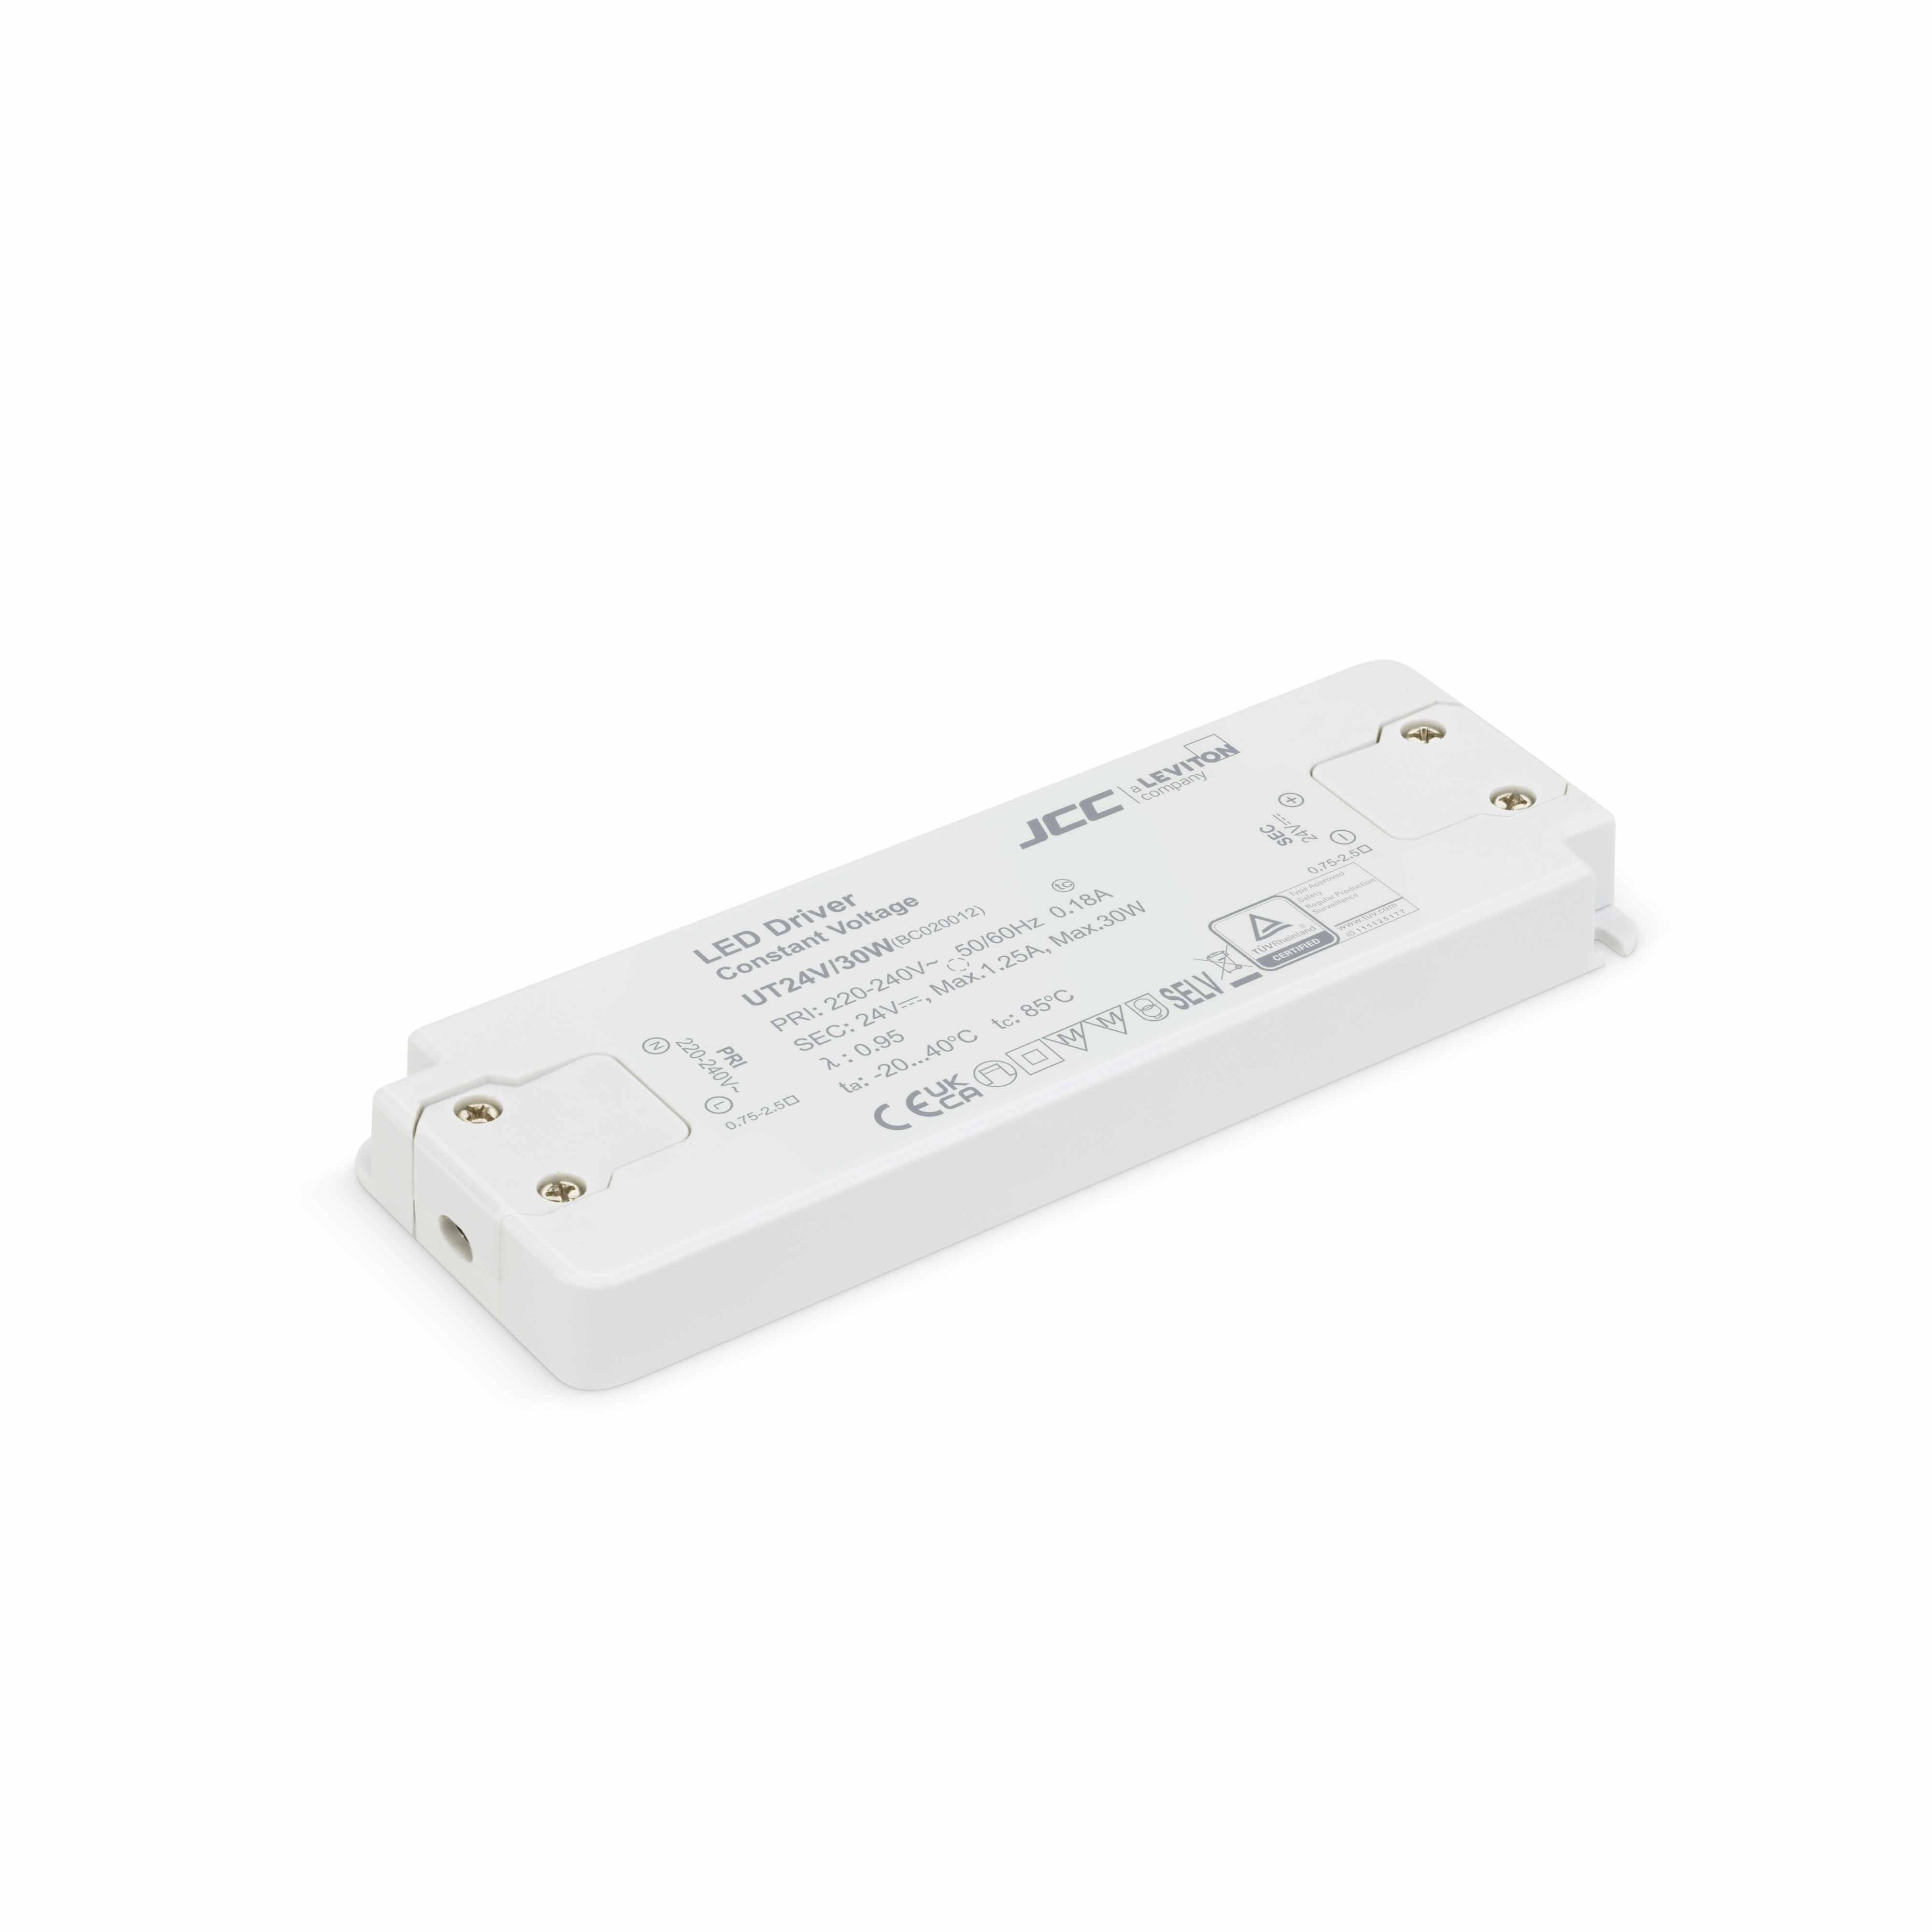 JCC BC020012 LED Non-Dimmable Driver 30W 24V